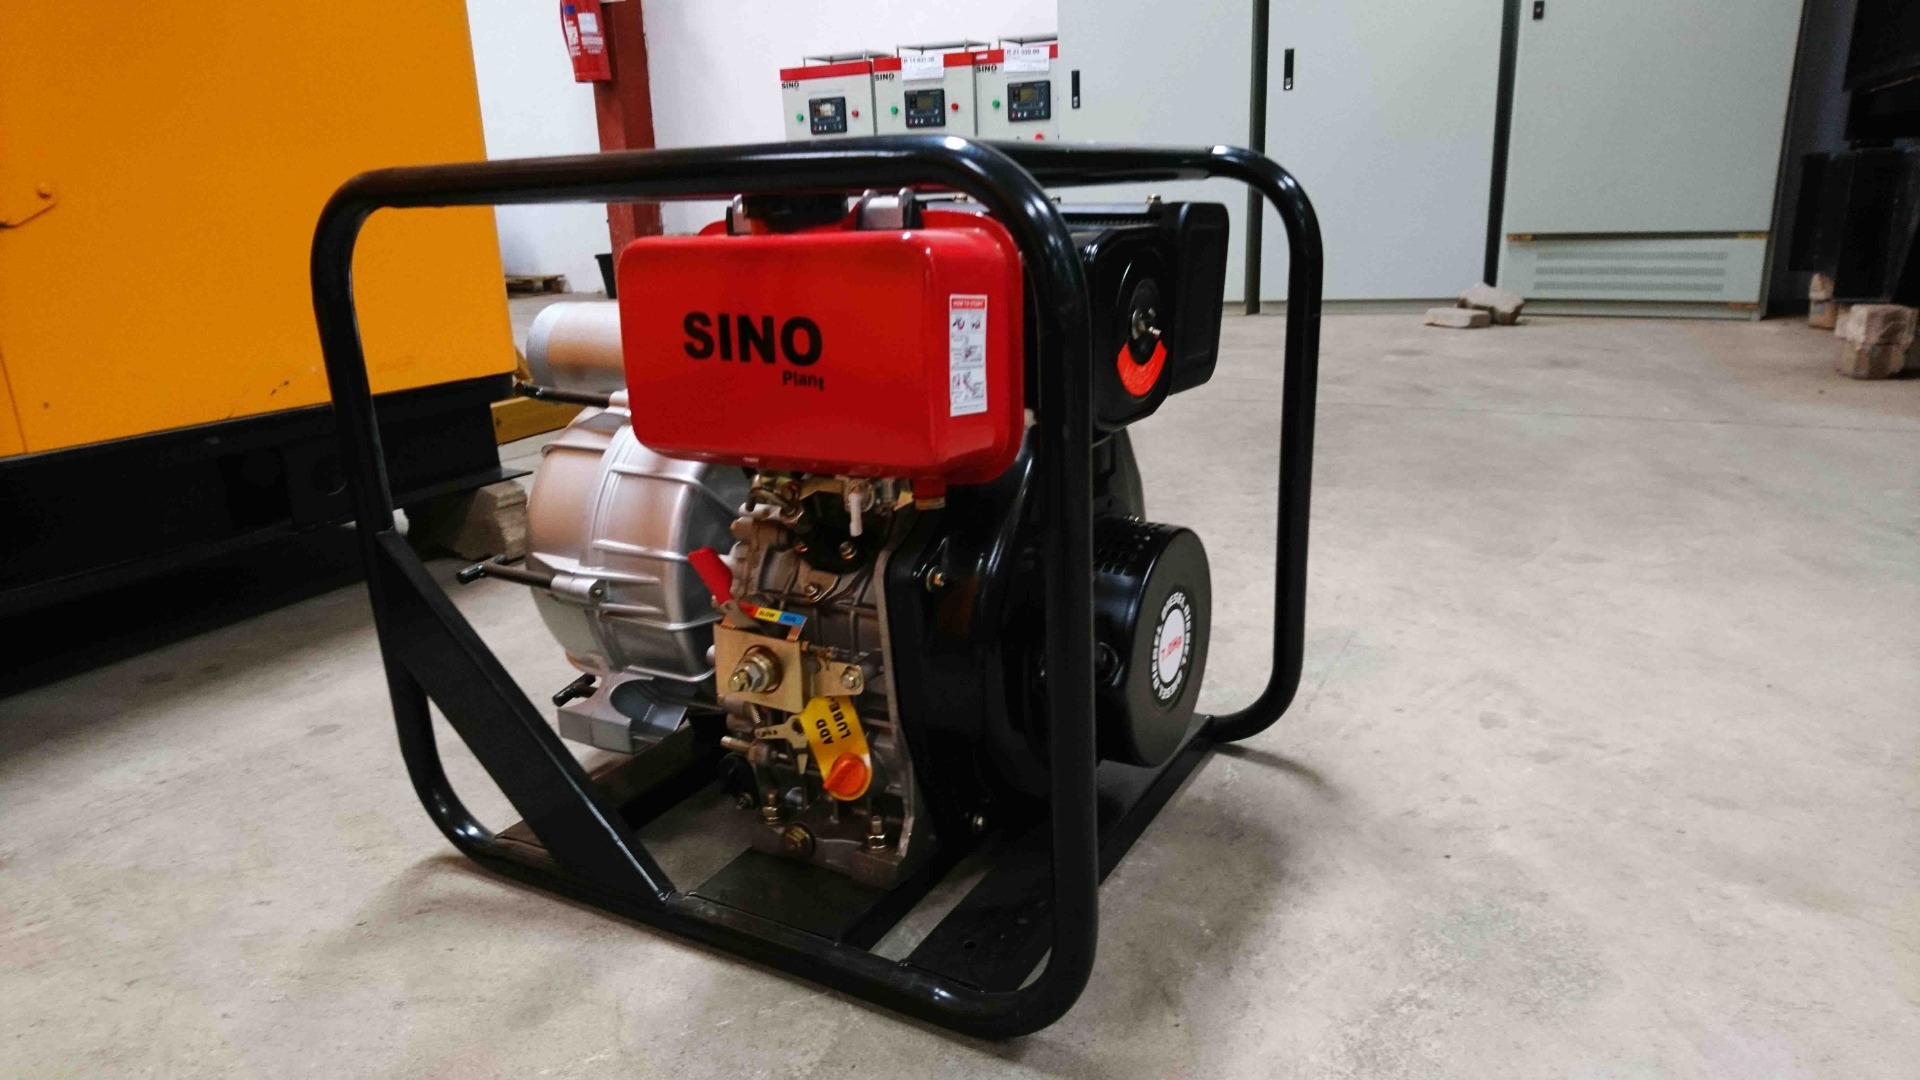 Sino Plant Water pumps 3" Dirty Water Pump Diesel 2022 for sale by Sino Plant | Truck & Trailer Marketplaces